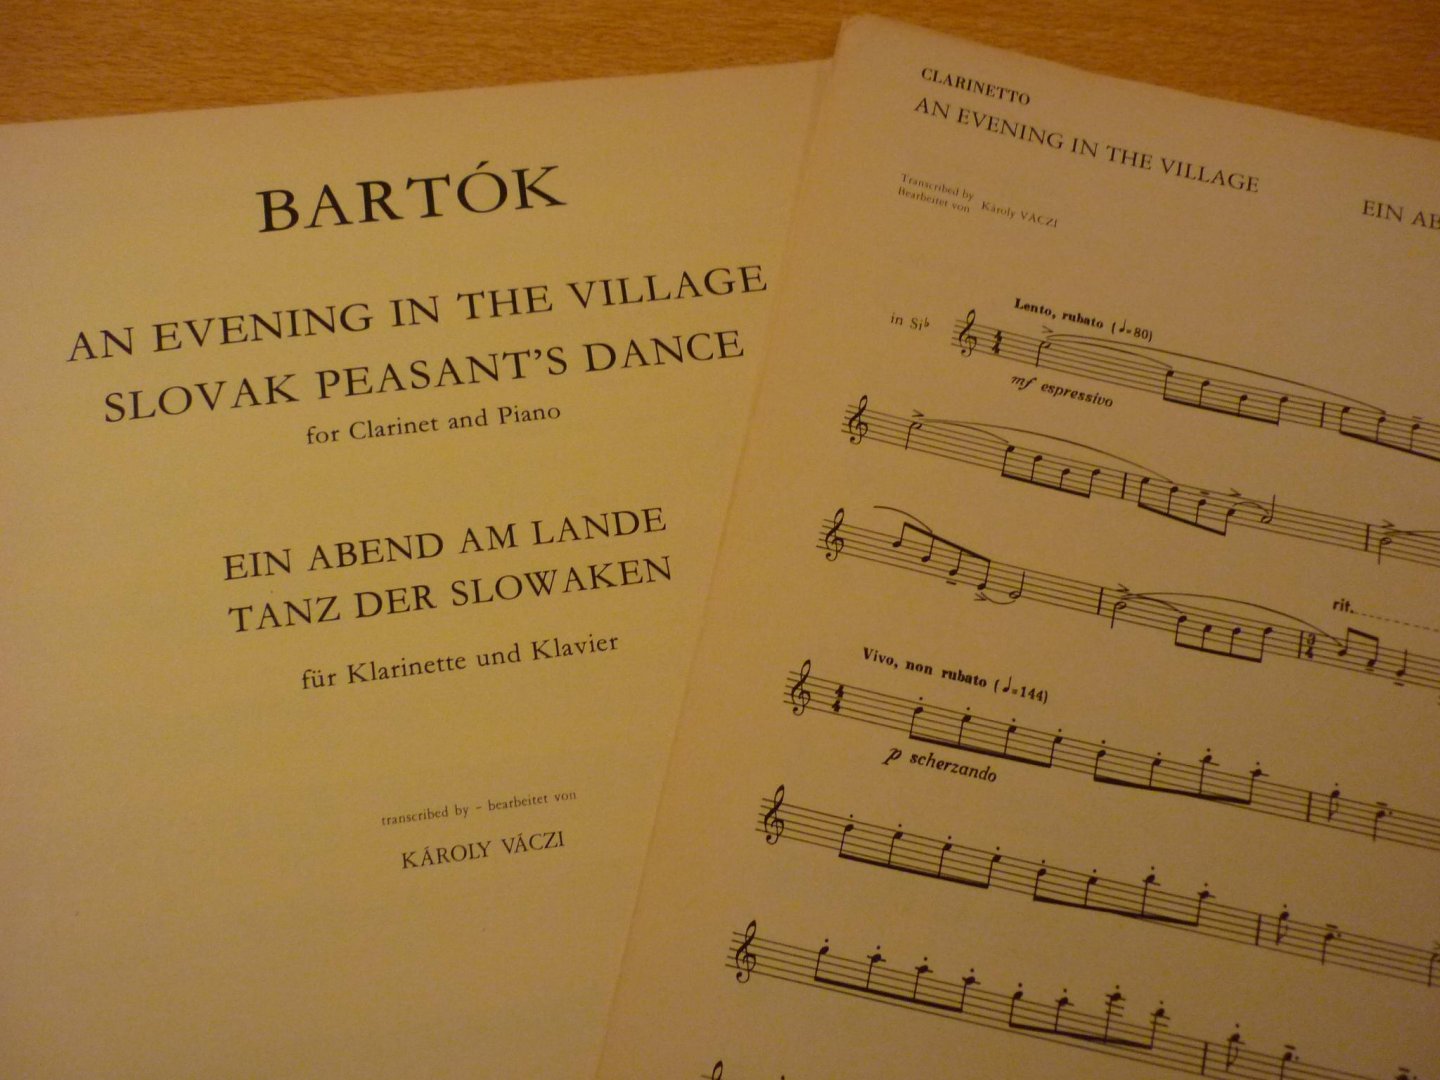 Bartok;Béla - An evening in the village; for clarinet and piano (Karoly Váczi)